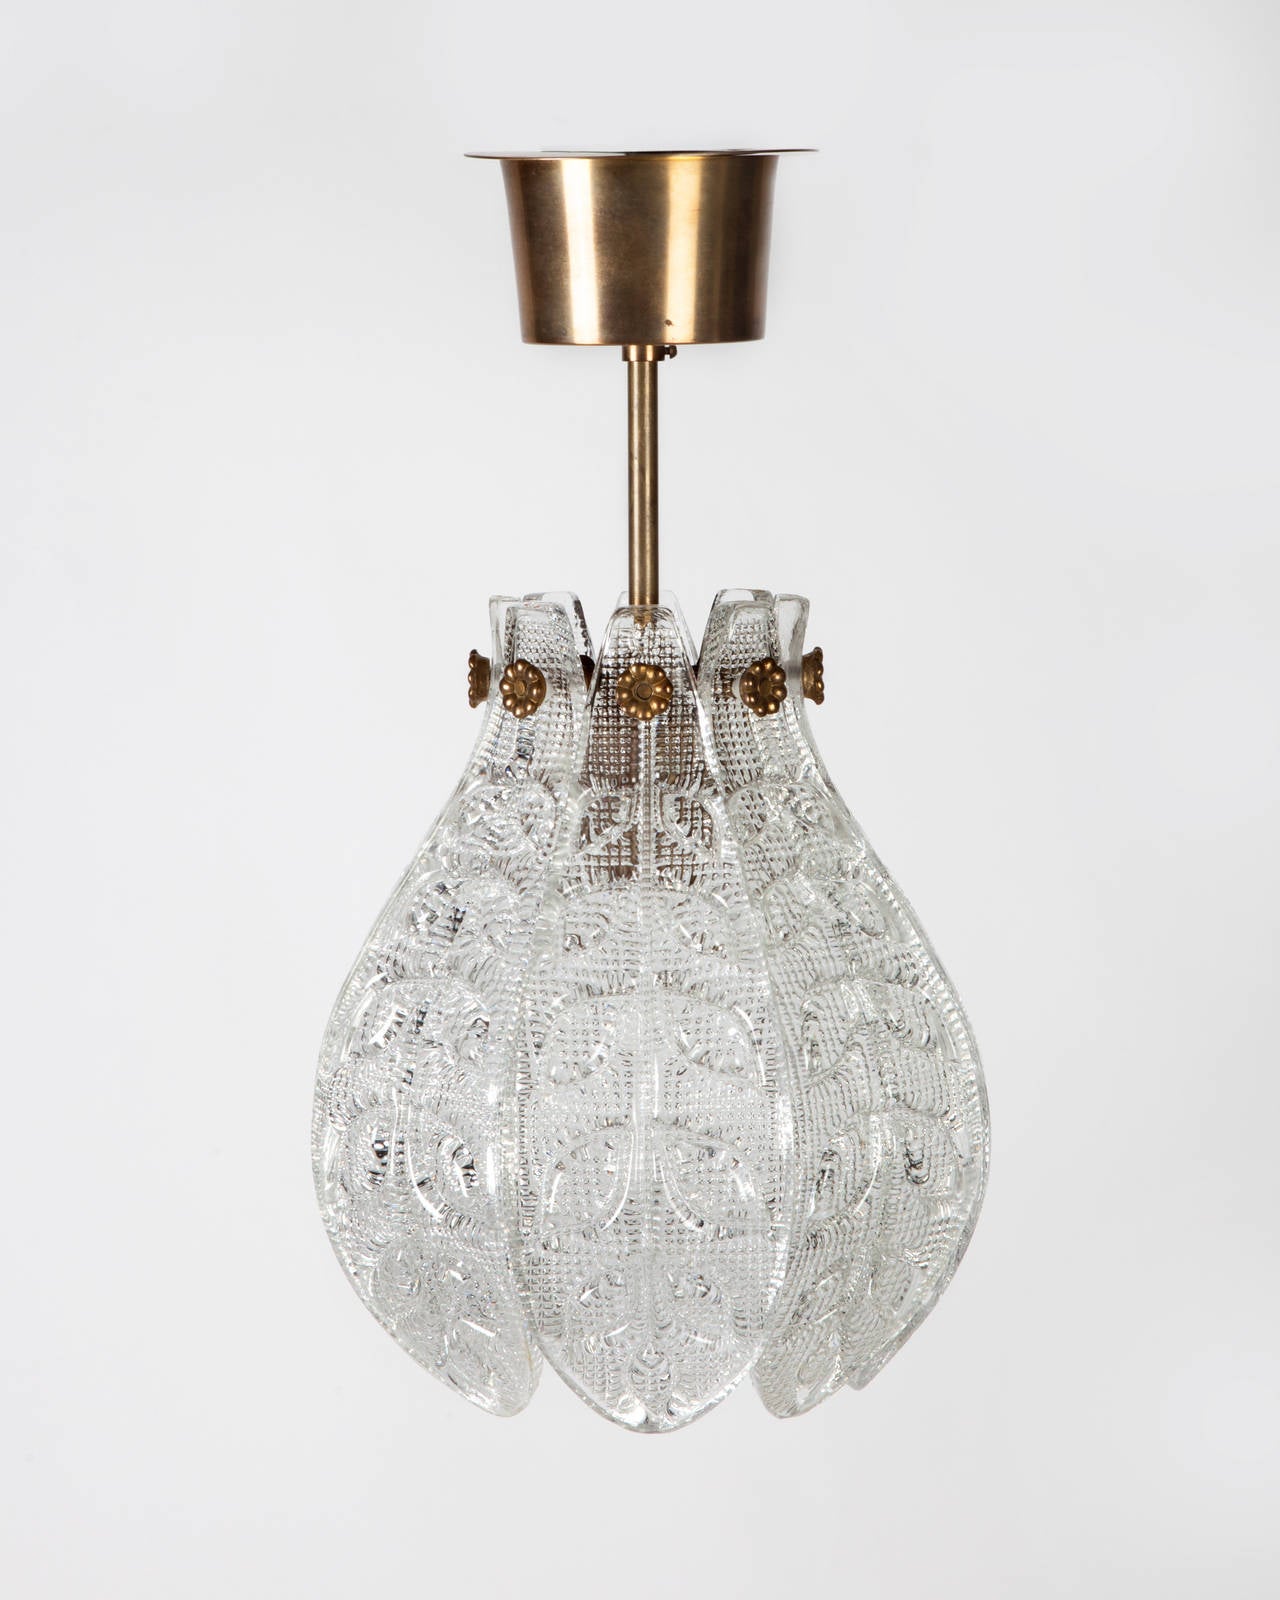 AHL3882

Circa 1950
A vintage, Scandinavian modern, tulip cup shaped pendant with foliate-detailed glass petals on its original aged brass fittings. Designed by Carl Fagerlund for the Swedish glassmaker Orrefors. Due to the antique nature of this